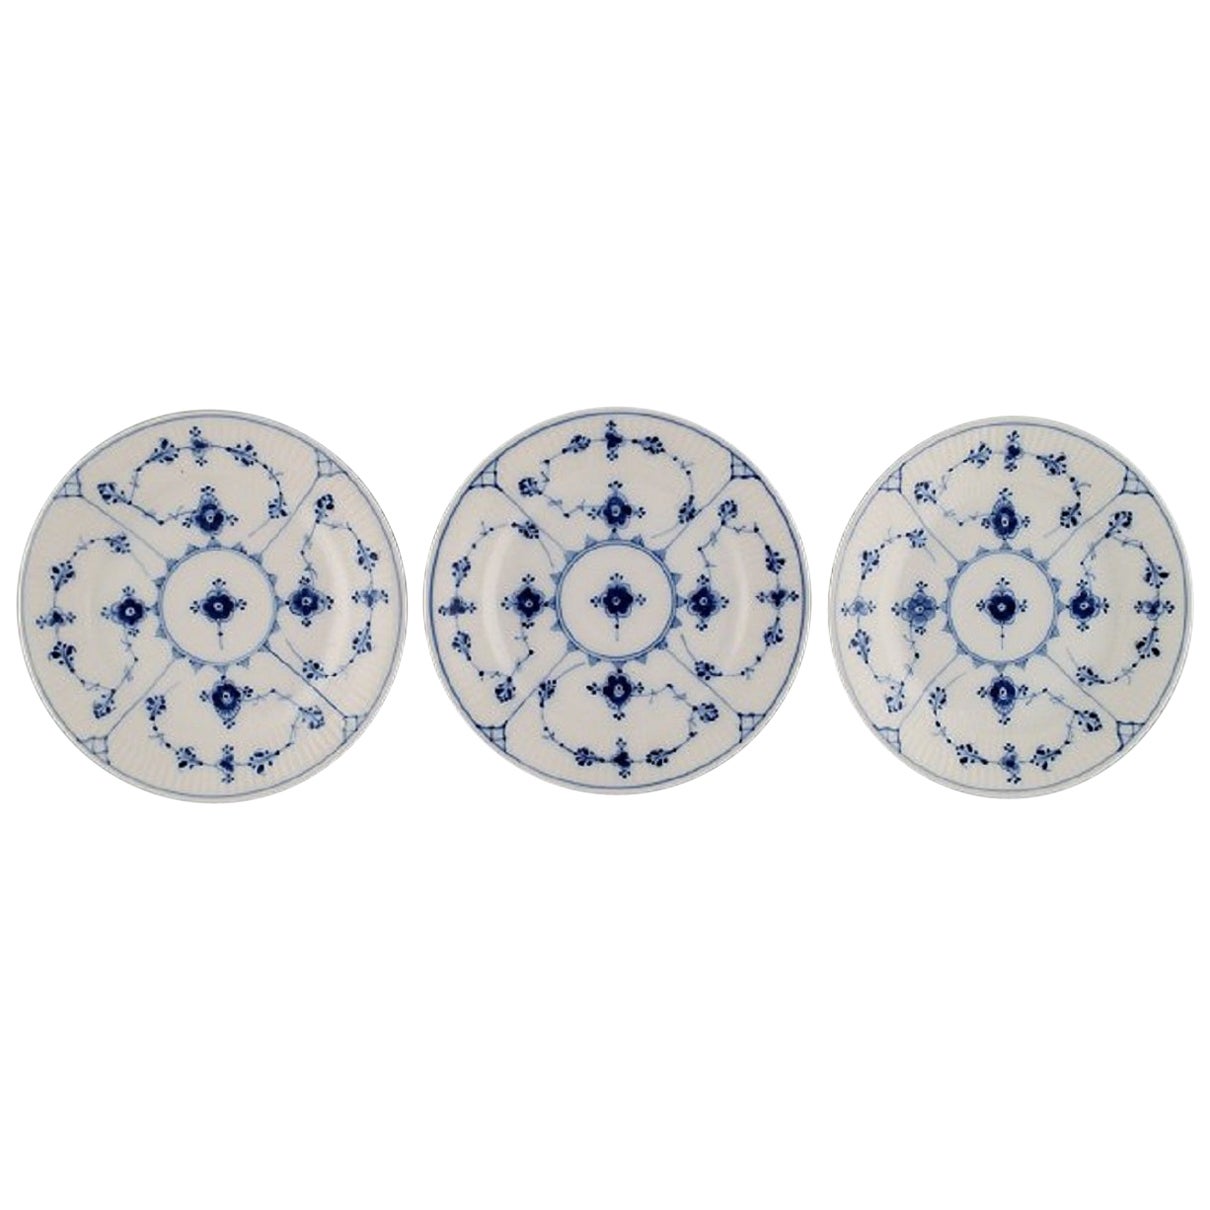 Three Royal Copenhagen Blue Fluted Plain Side Plates in Hand-Painted Porcelain